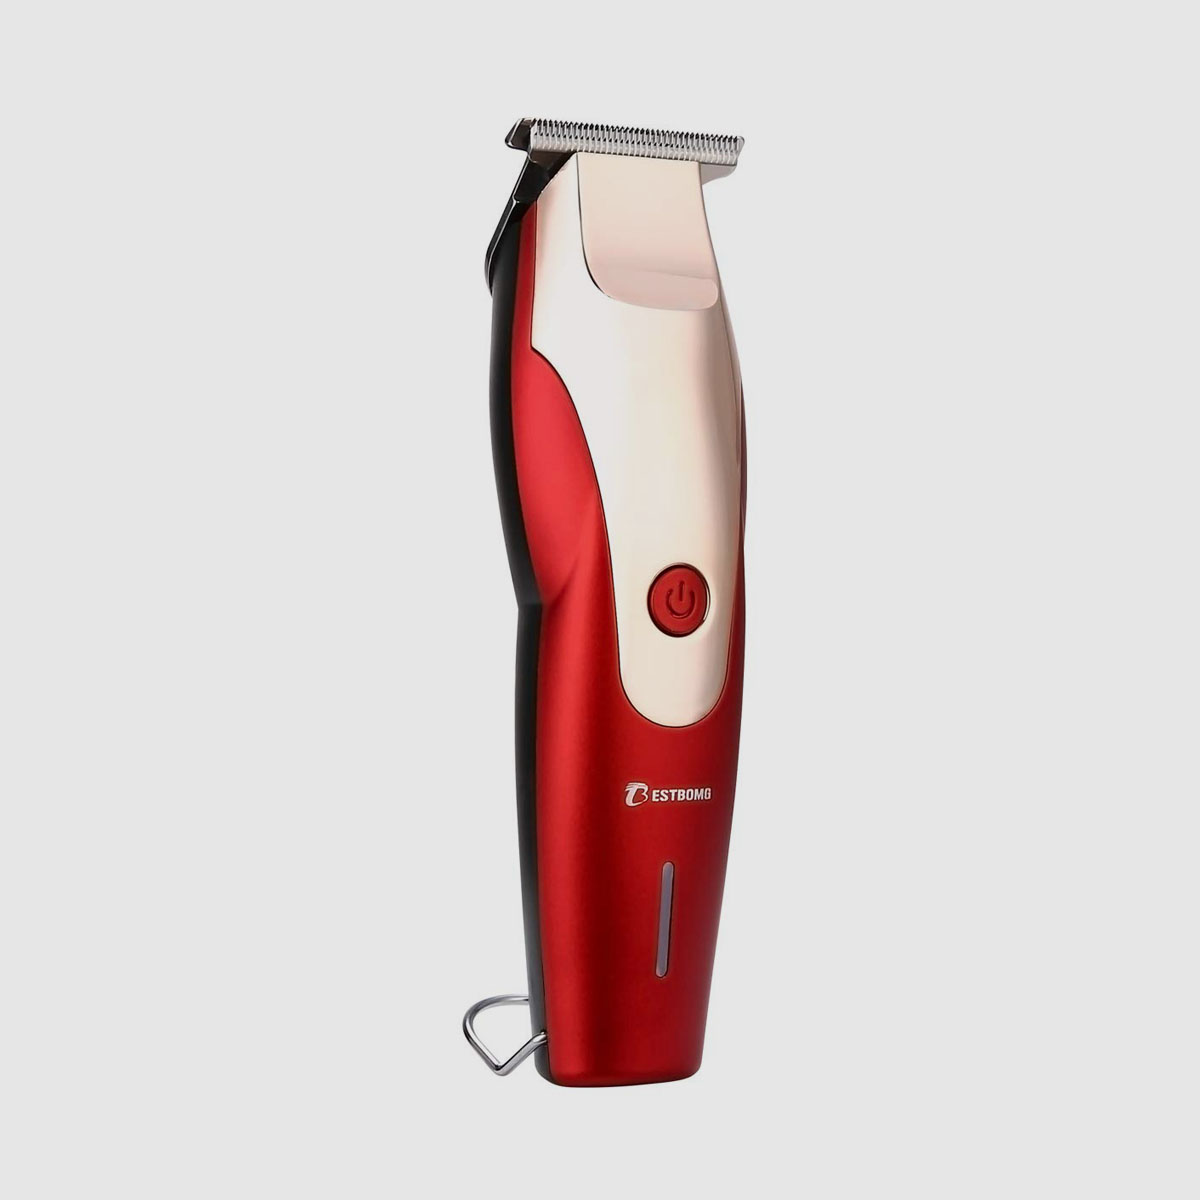 How to choose the right electric clippers